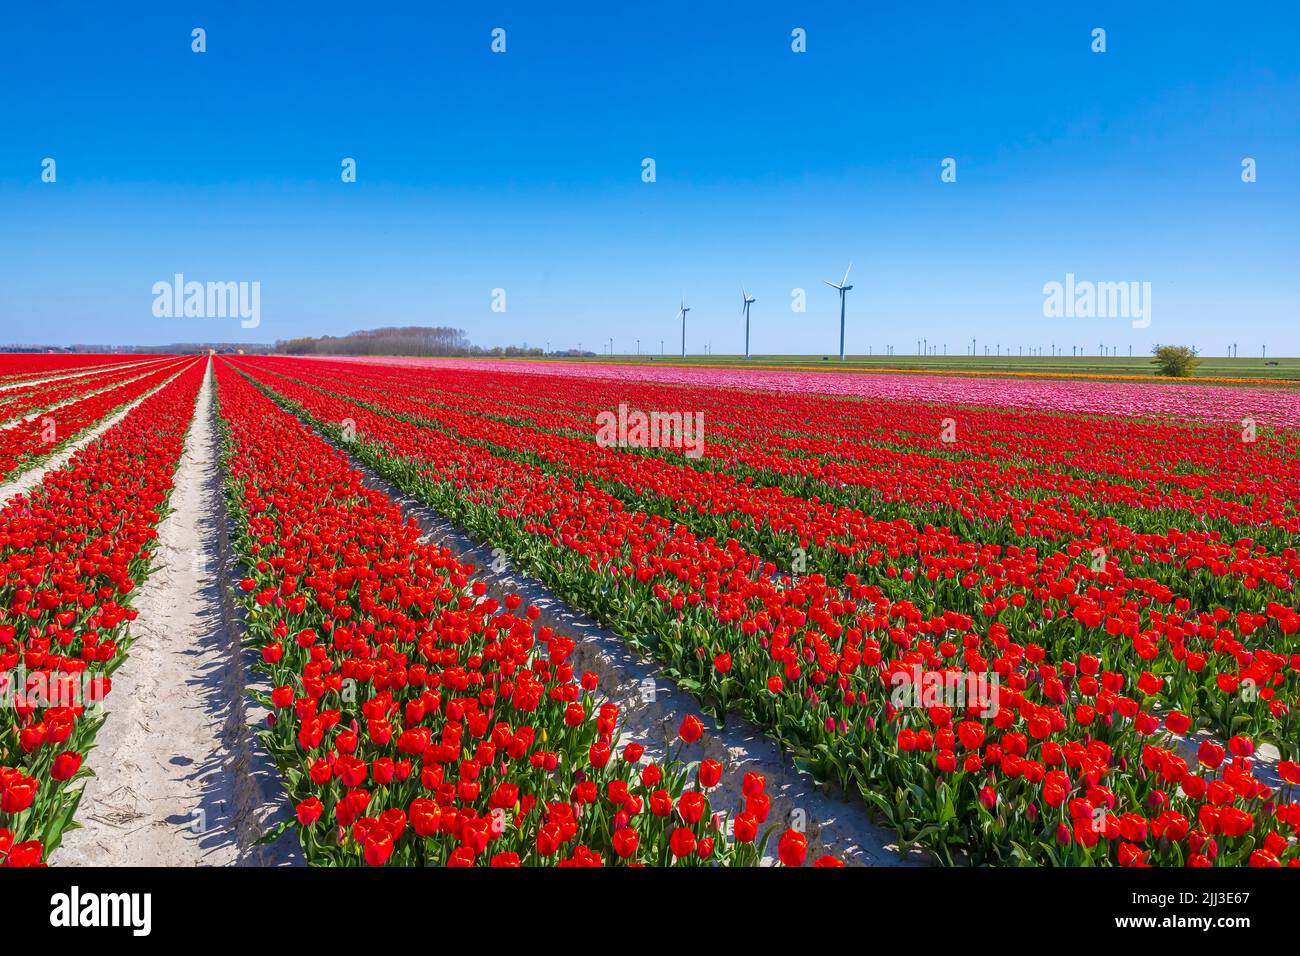 Blooming colorful Dutch red tulips flower field under a blue sky. Zeeland, the Netherlands Stock Photo